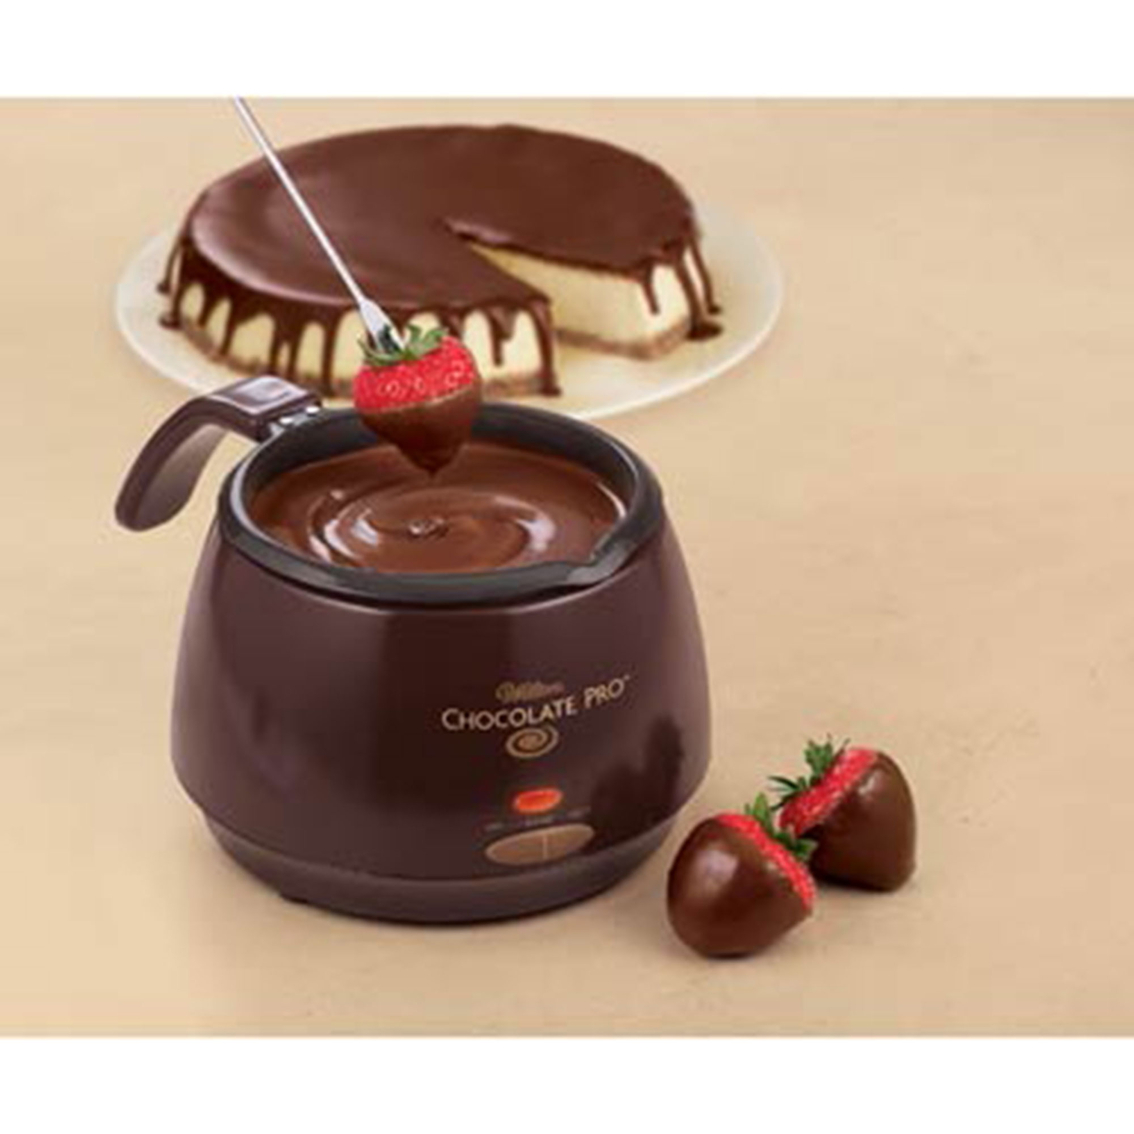 Wilton Chocolate Pro Electric Chocolate Melter - Image 2 of 2